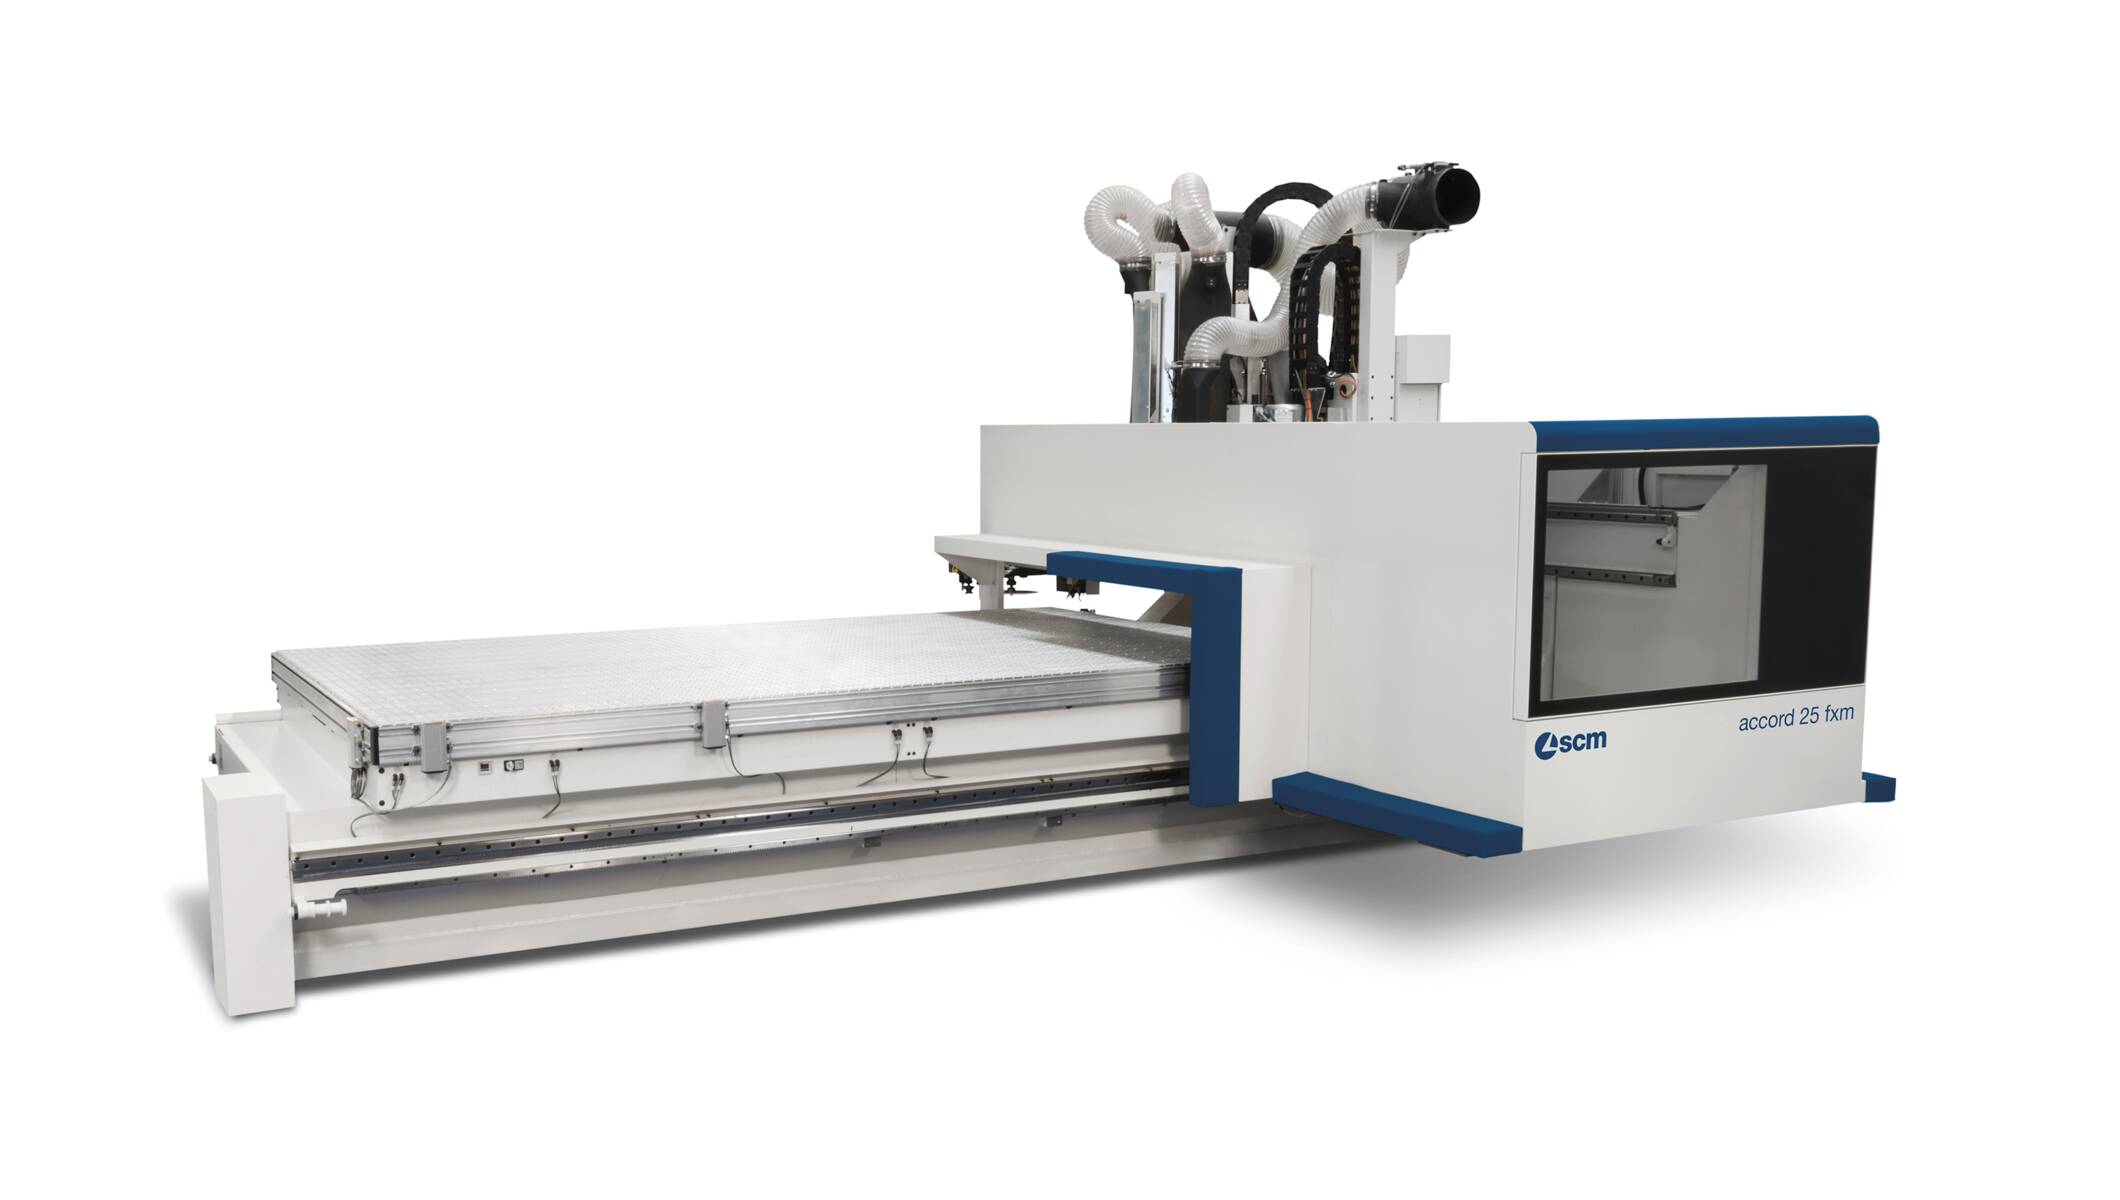 CNC Machining Centres - CNC Nesting Machining Centres for routing and drilling - accord 25 fxm